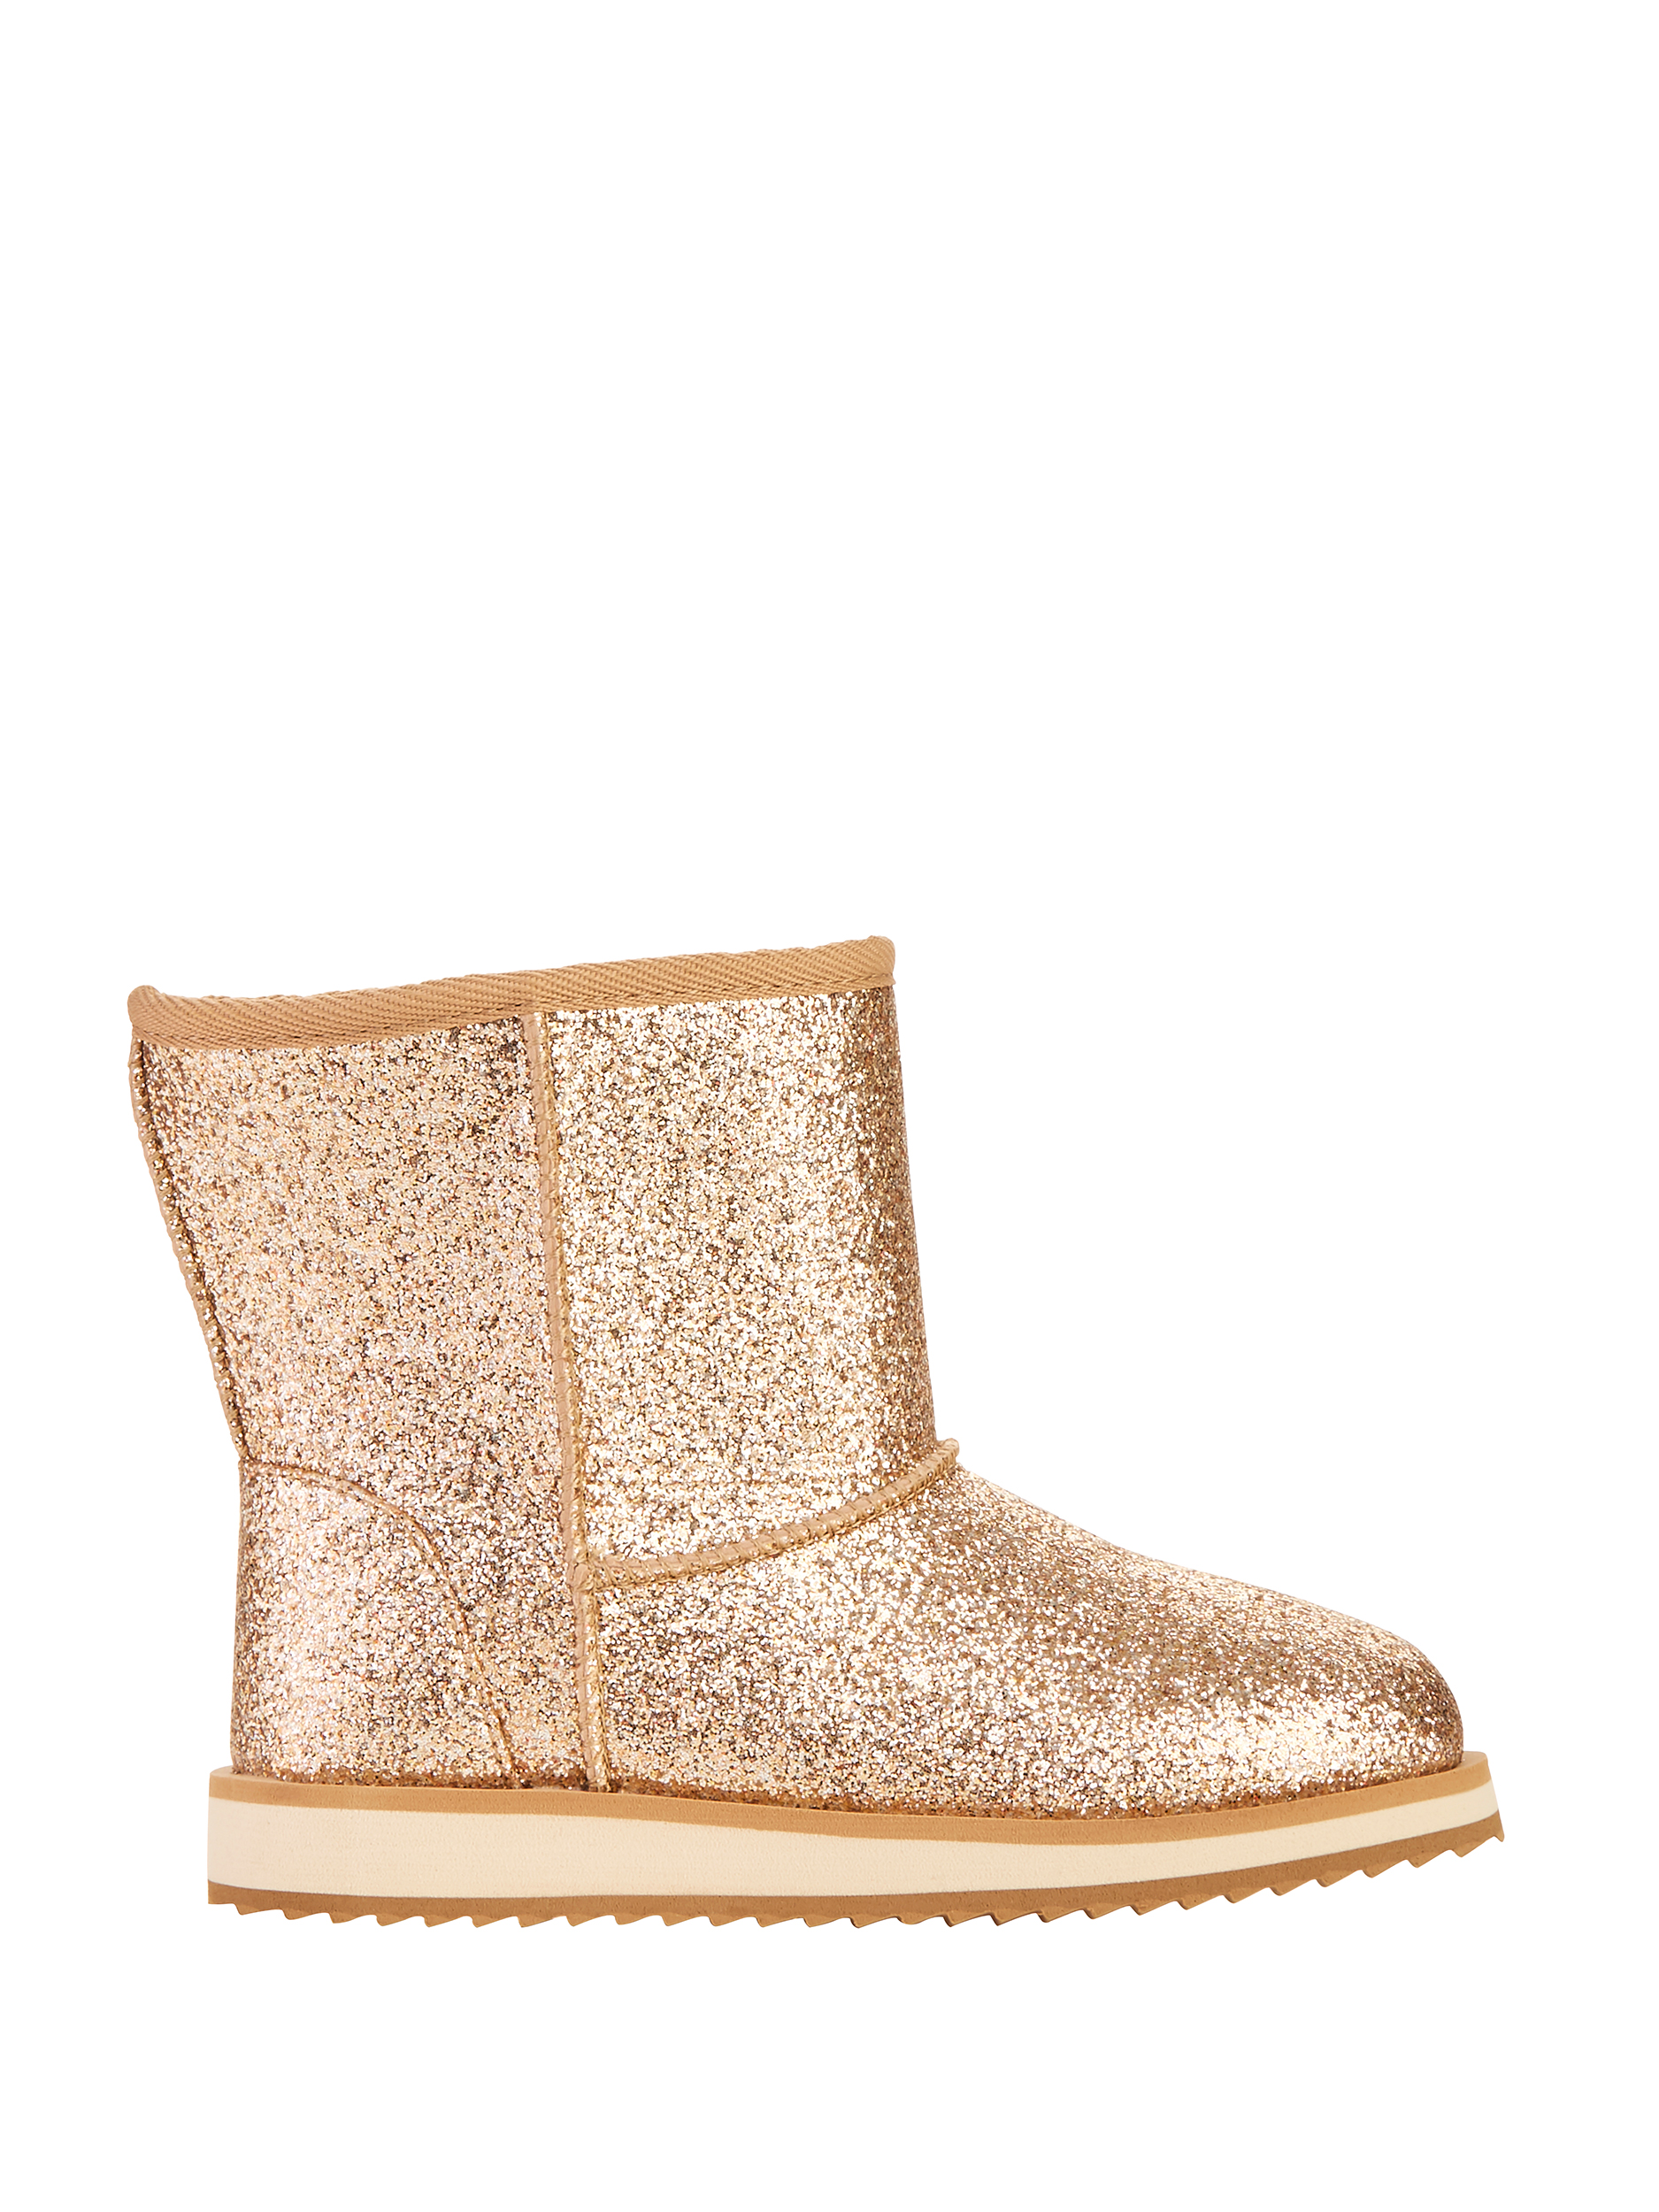 Wonder Nation Girls Faux Shearling Boots - image 5 of 6